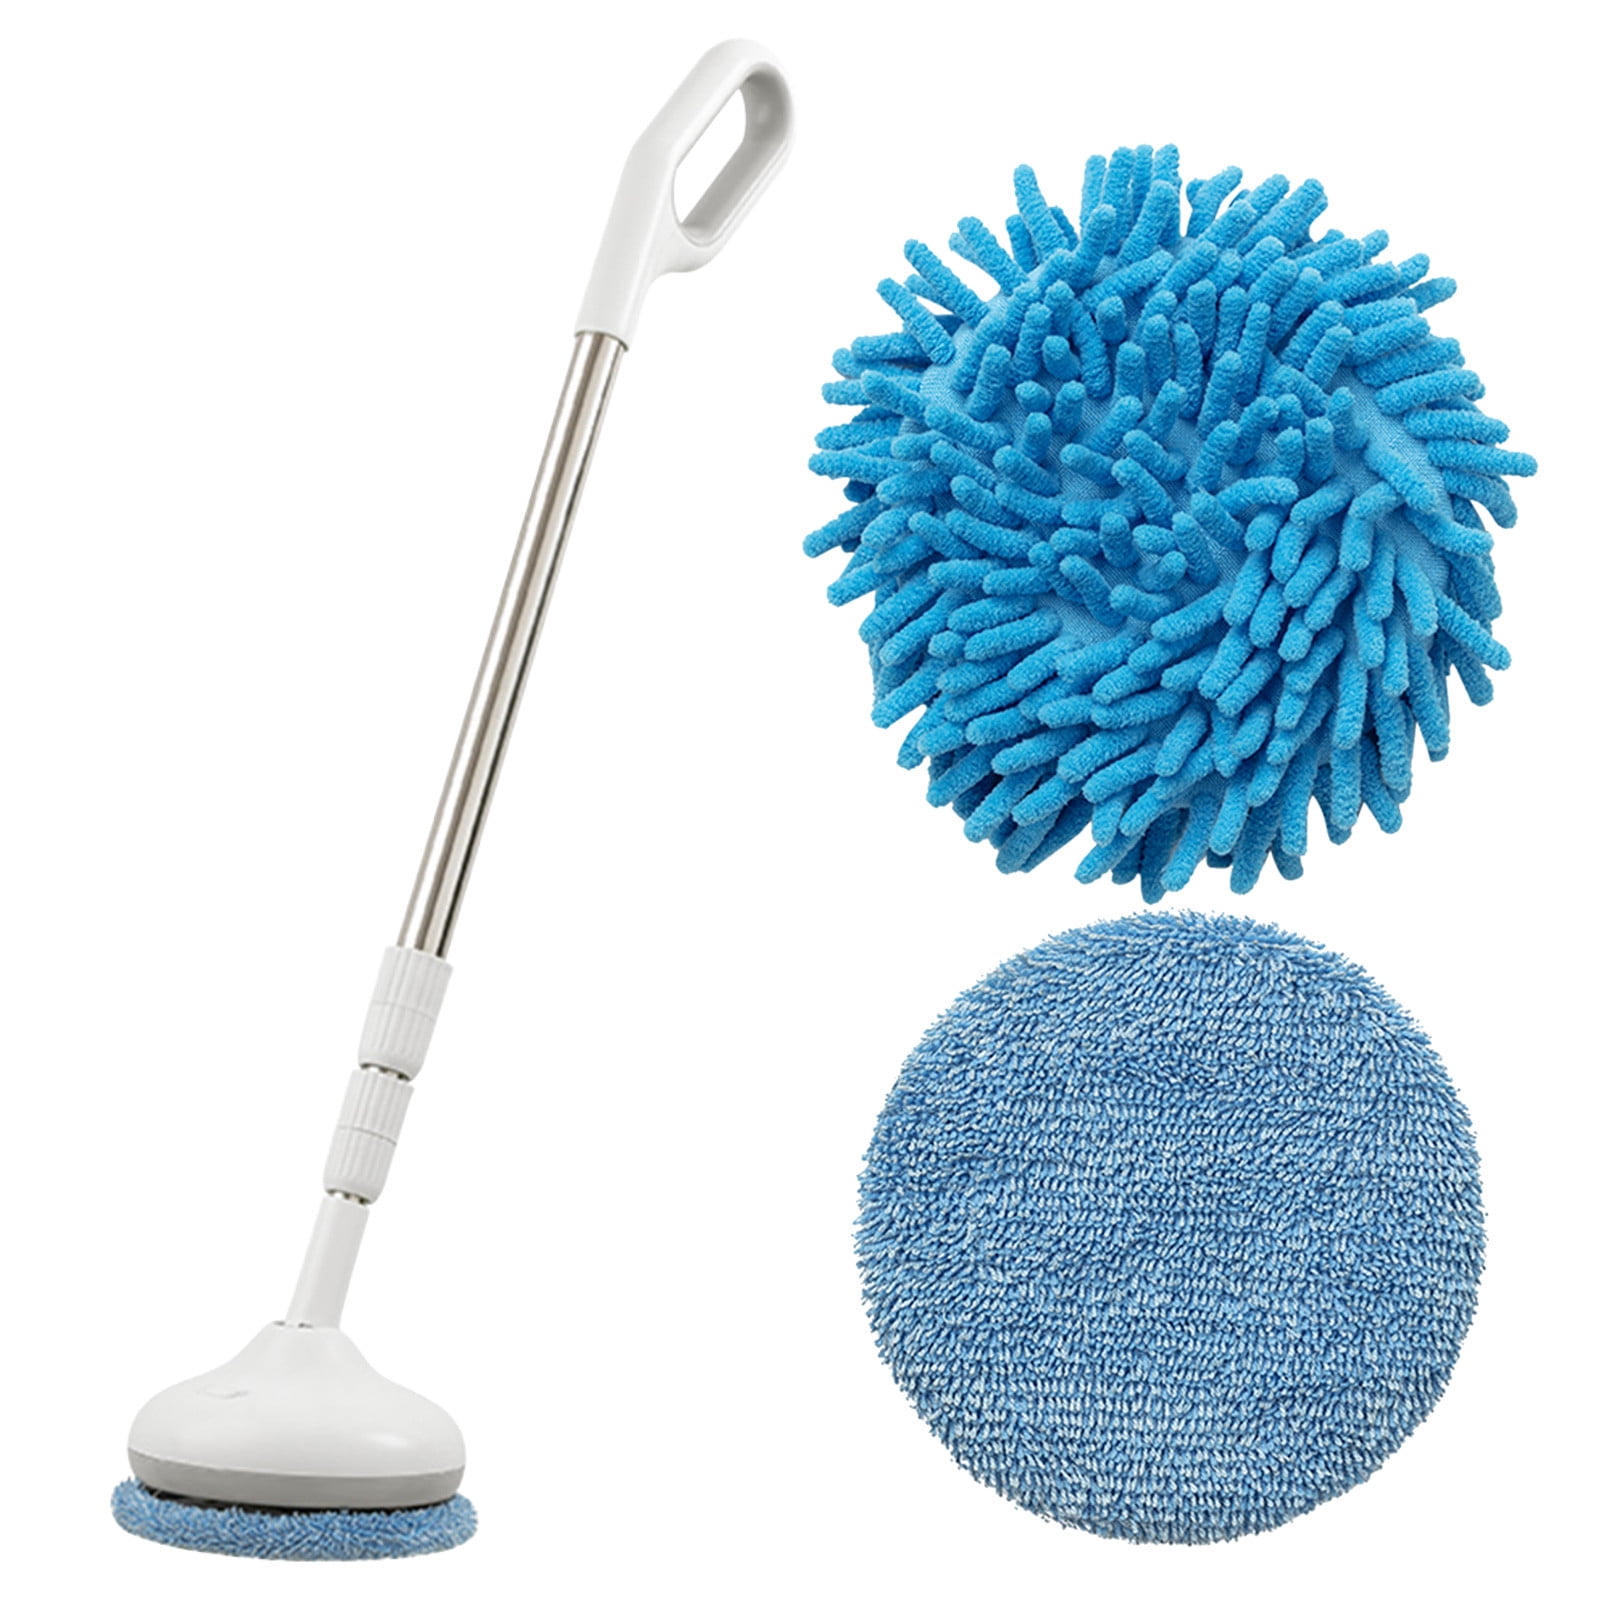 Optima Shoppe© Smart Cleaning Brush - Cordless Rechargeable Electric f